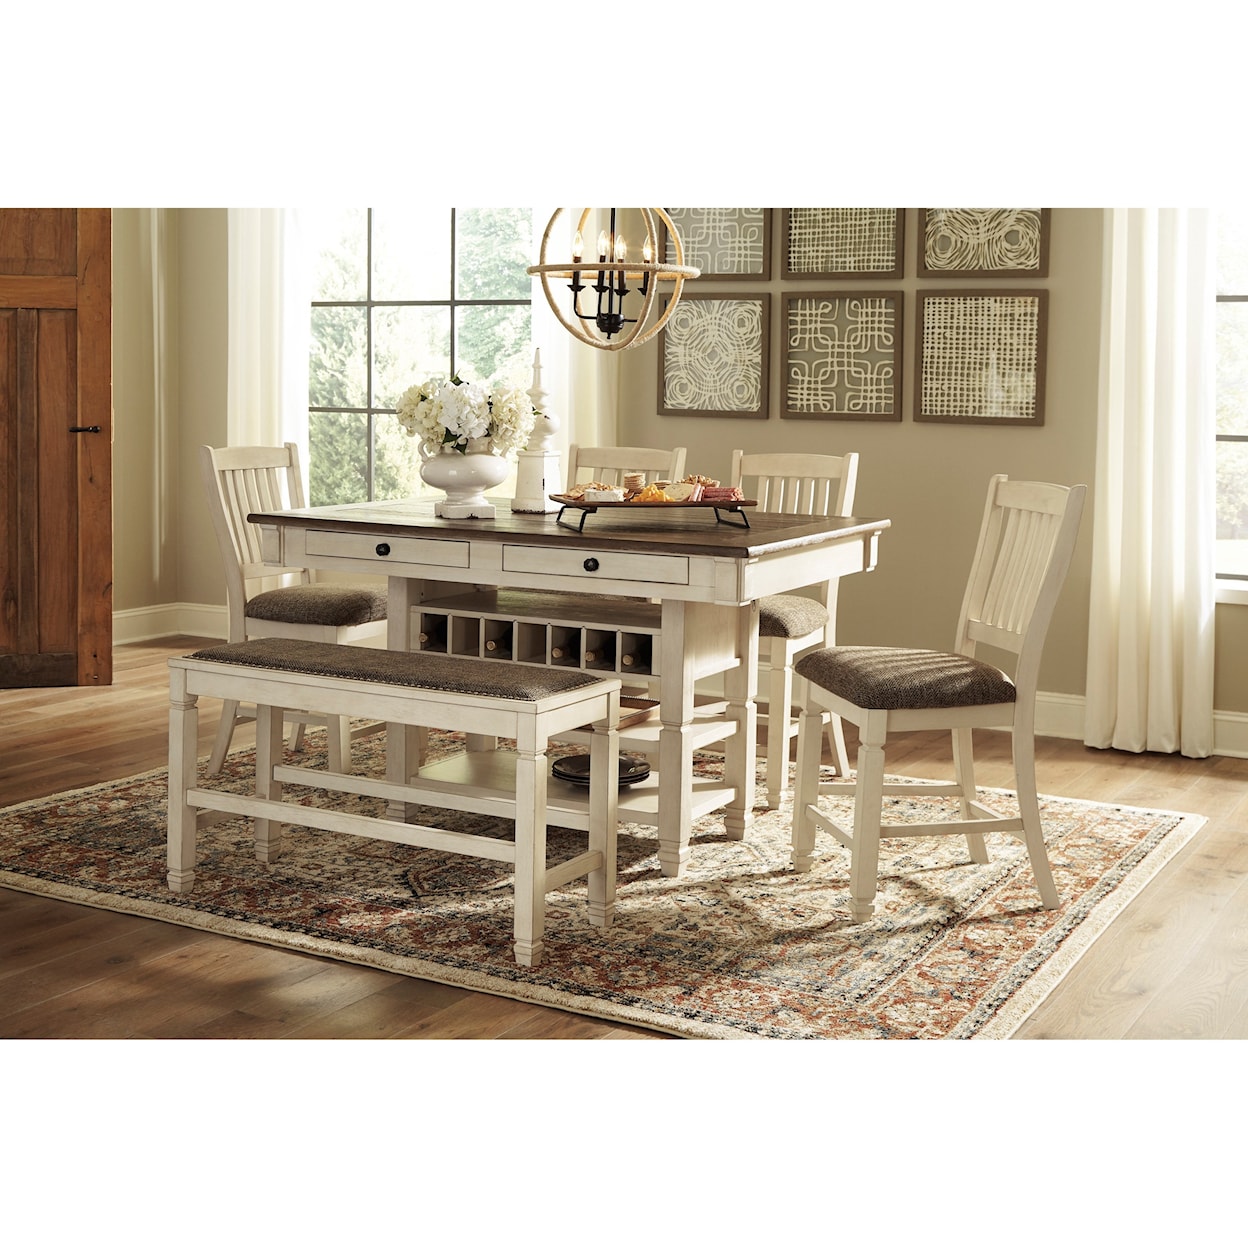 Signature Design by Ashley Bolanburg 6-Piece Counter Table Set with Bench